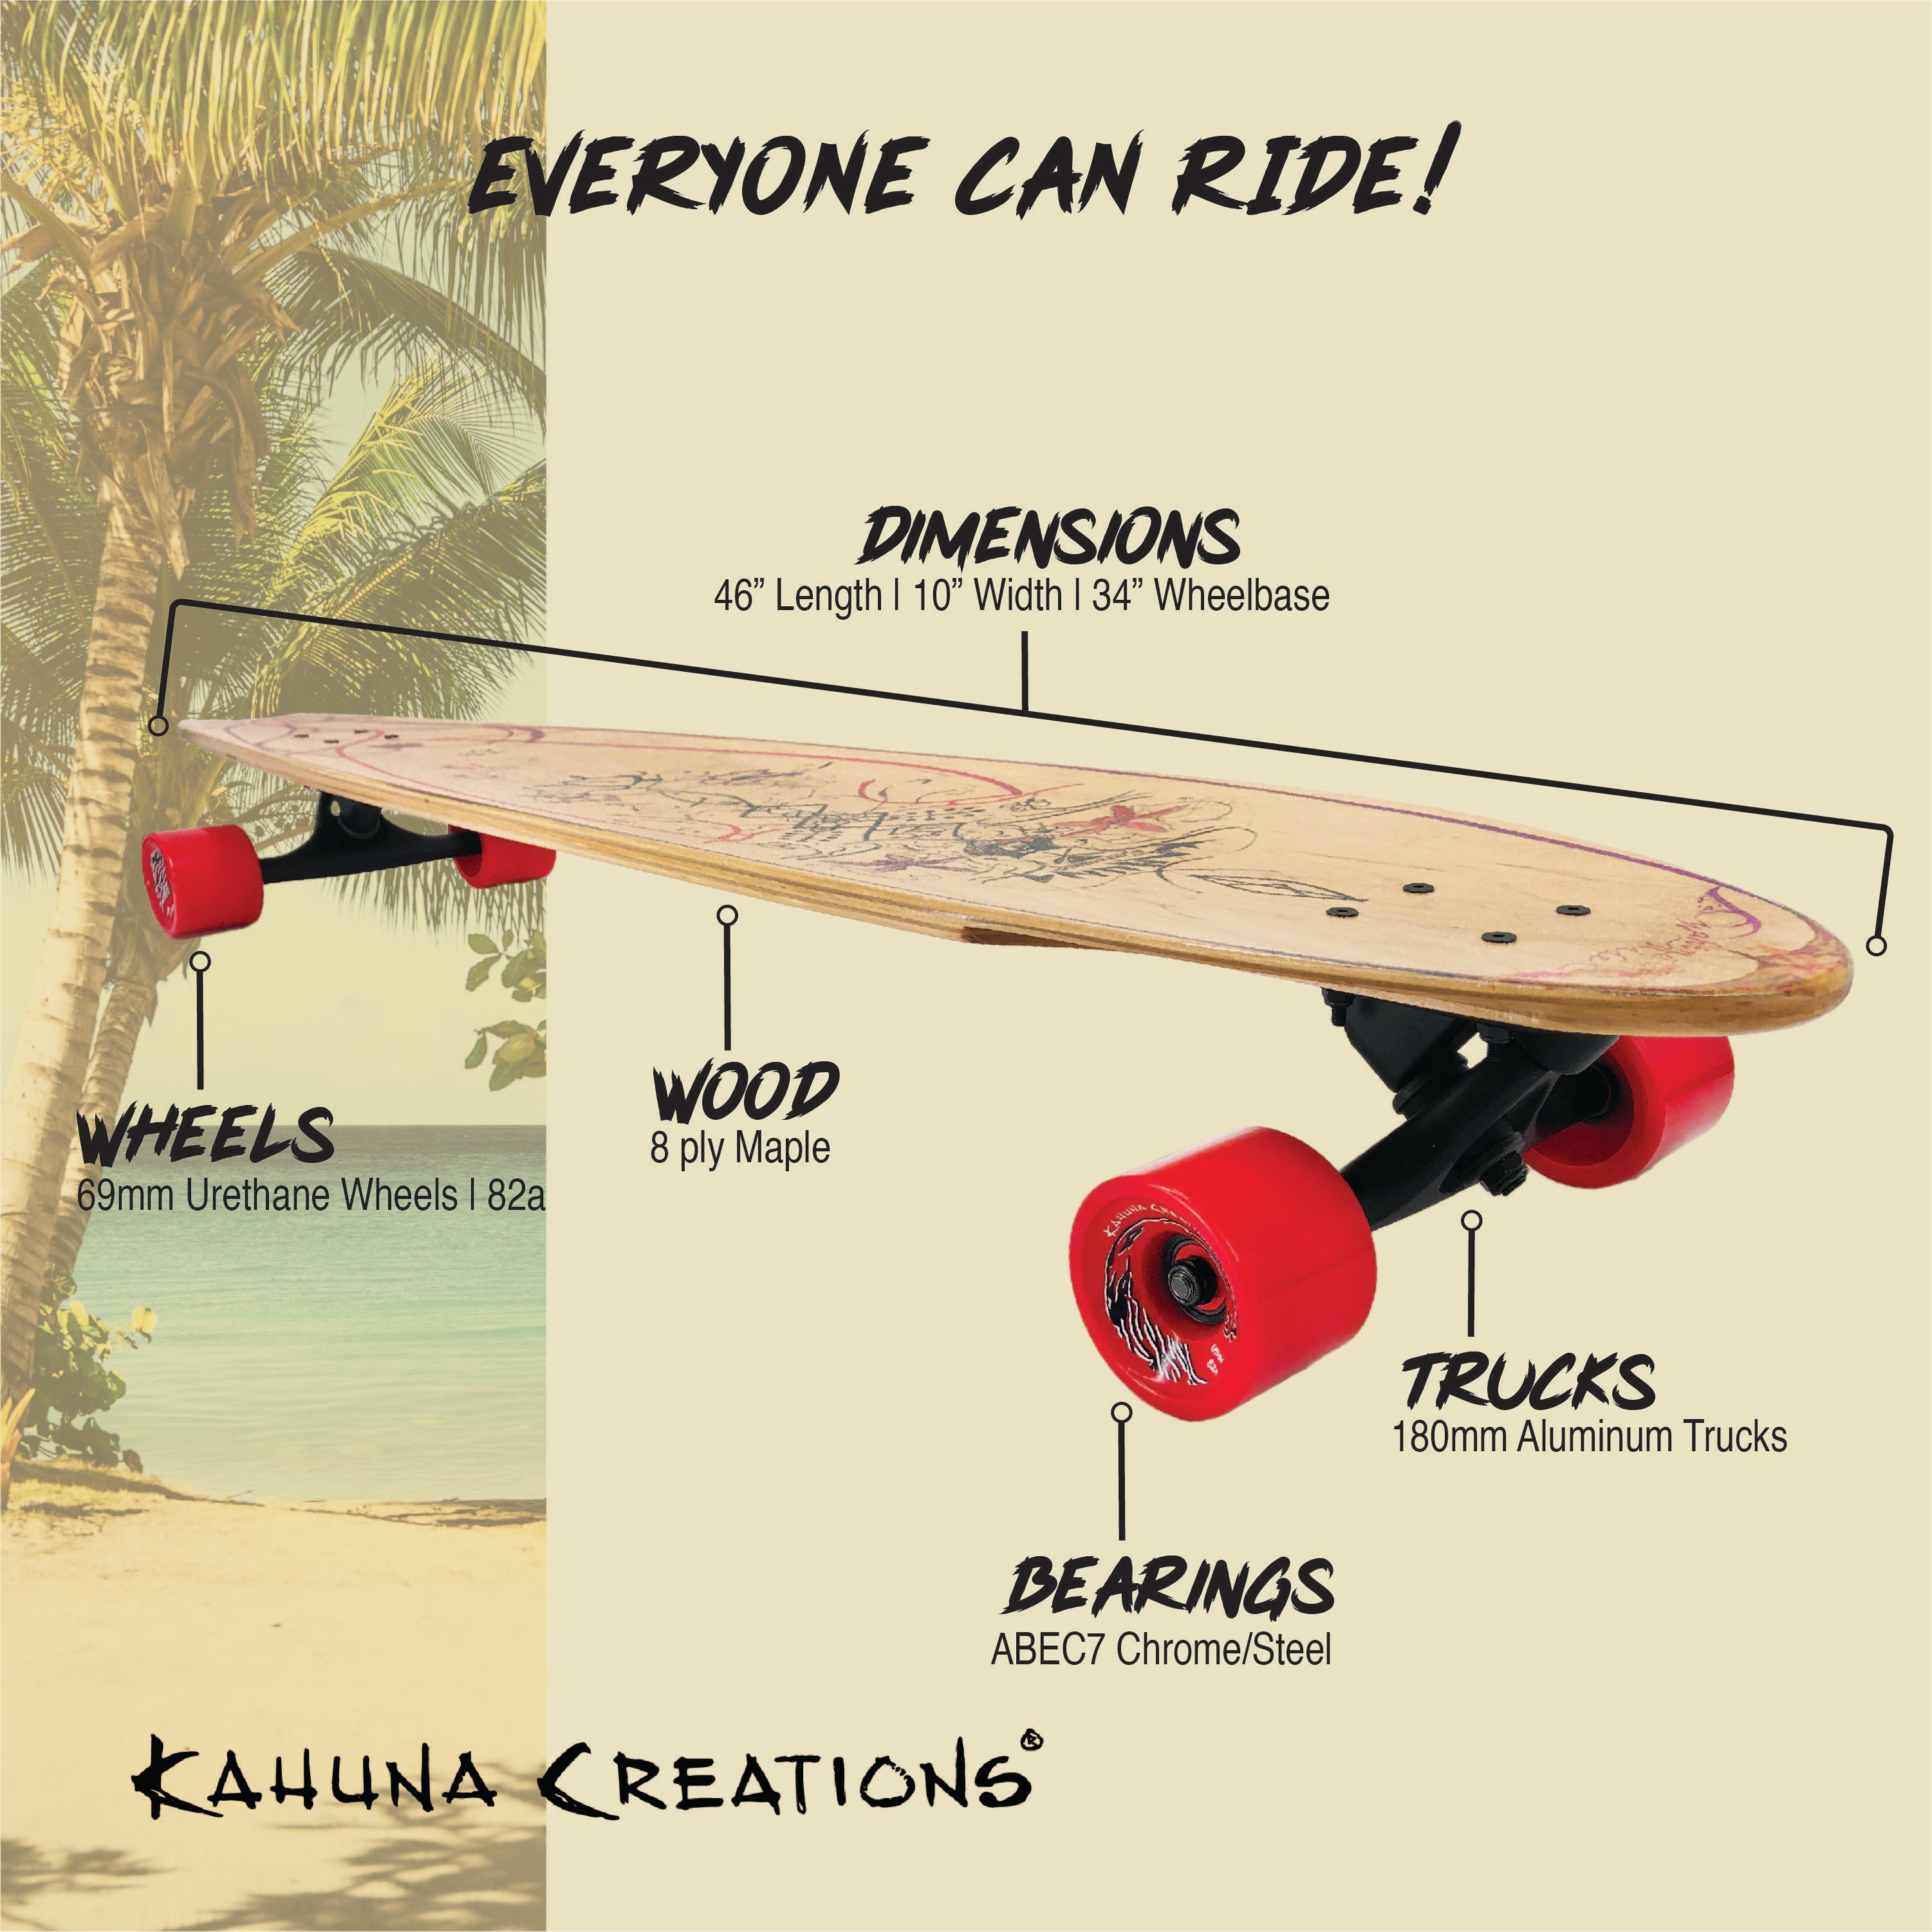 Kahuna Creations: Longboards, Land Paddles and Surf-Style Apparel